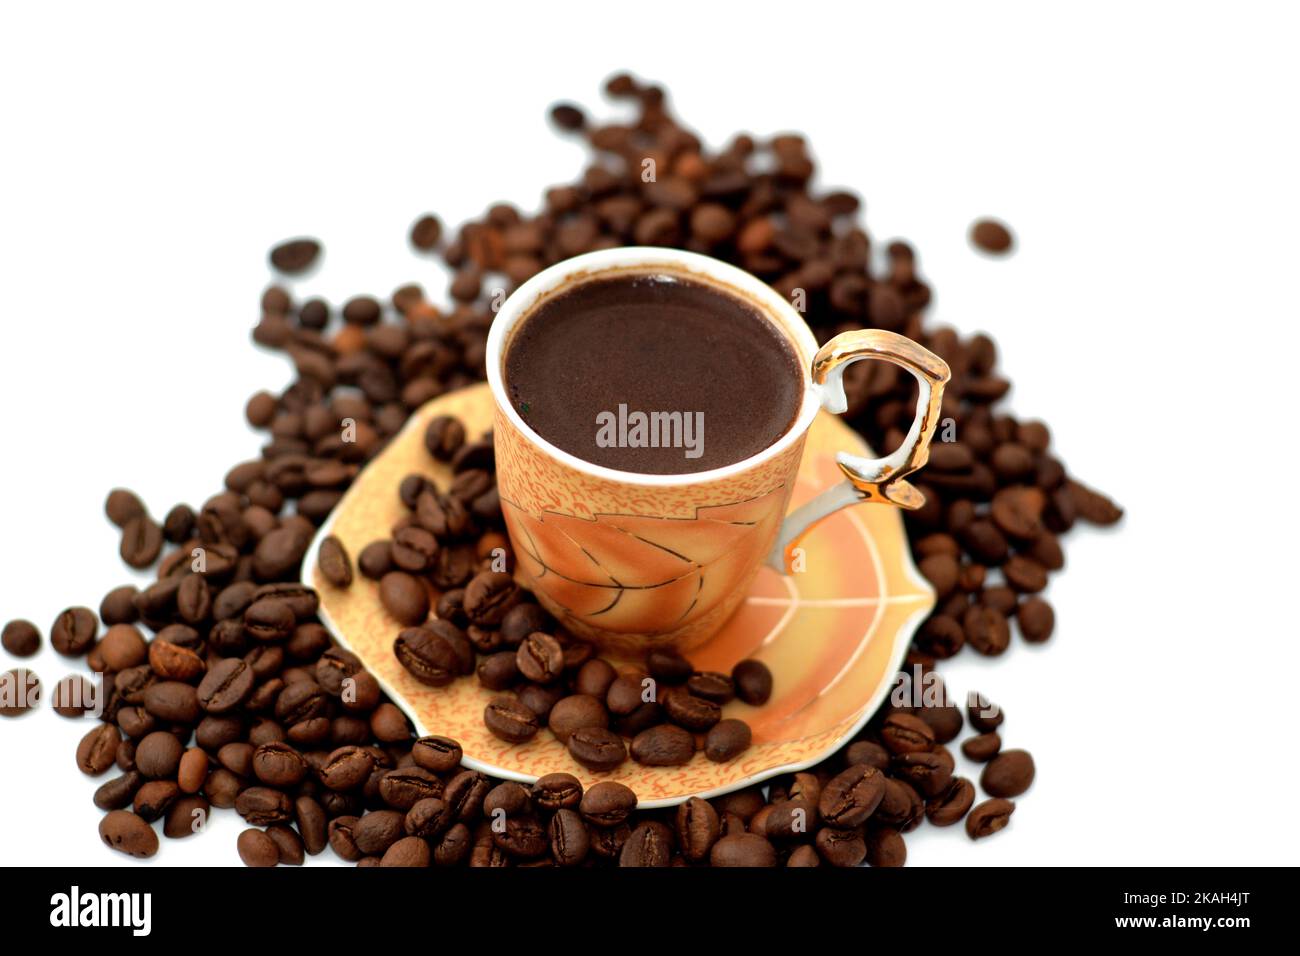 A cup of Turkish coffee with coffee beans, seeds of the Coffea plant and the source for coffee. It is the pip inside the red or purple fruit often ref Stock Photo